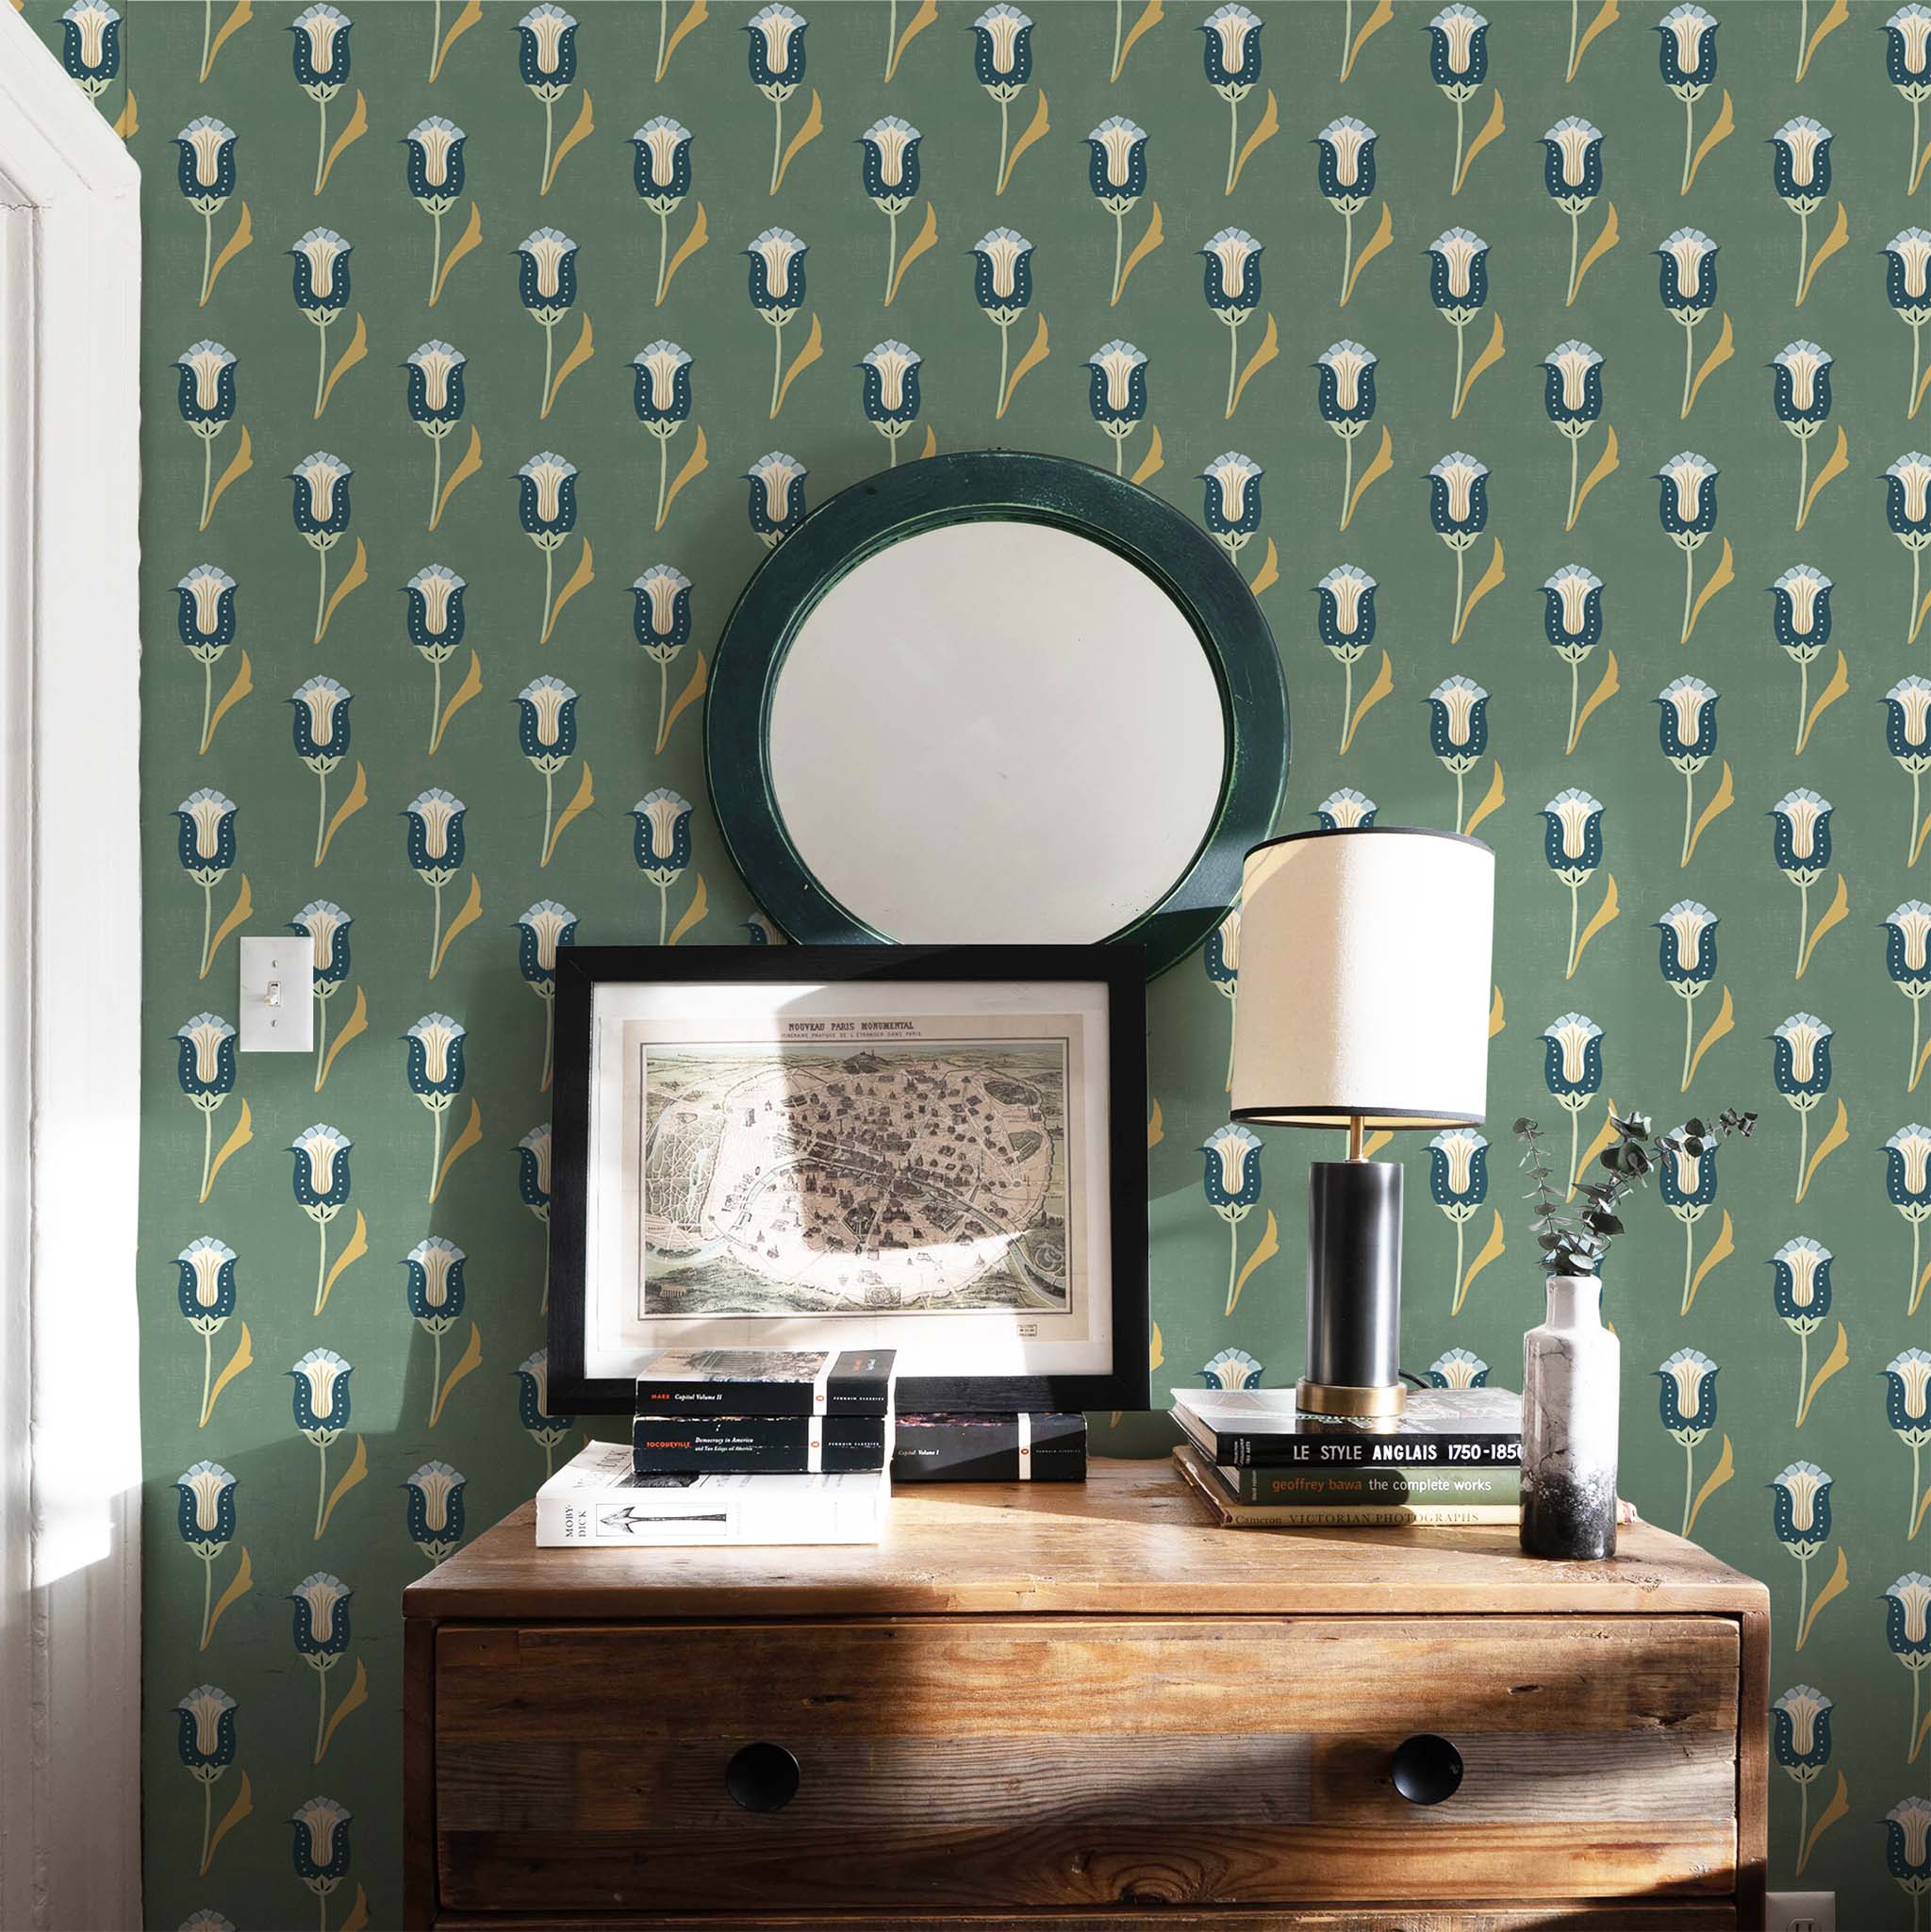 Vignette of a room with Green, navy and blue tulip wallpaper styled with a wooden dresser and green round mirror